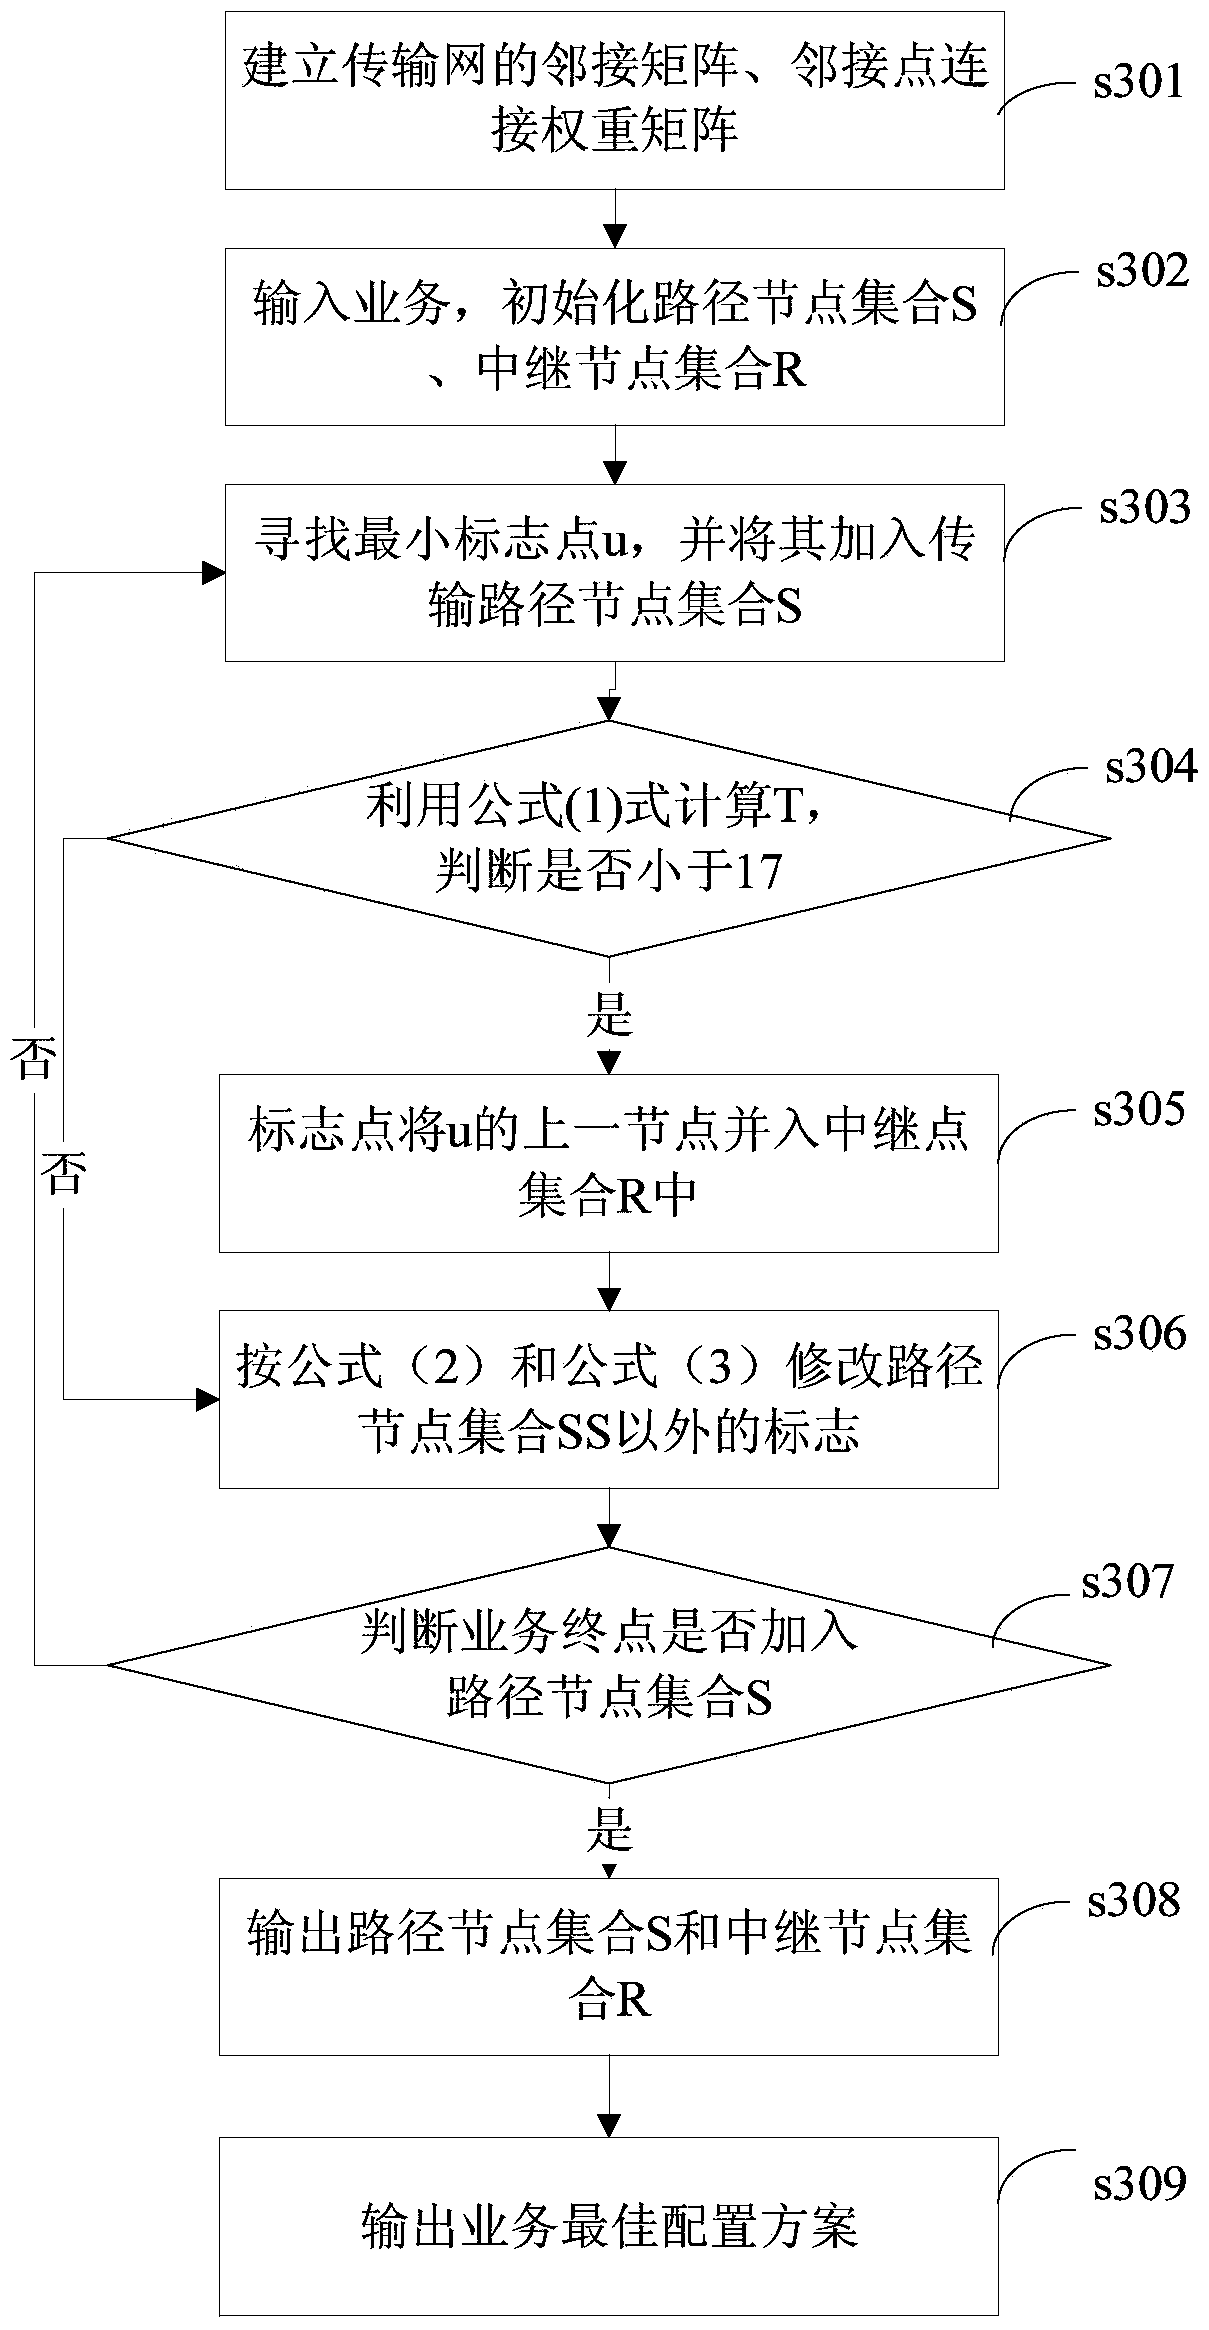 Transmission network service configuration method and system